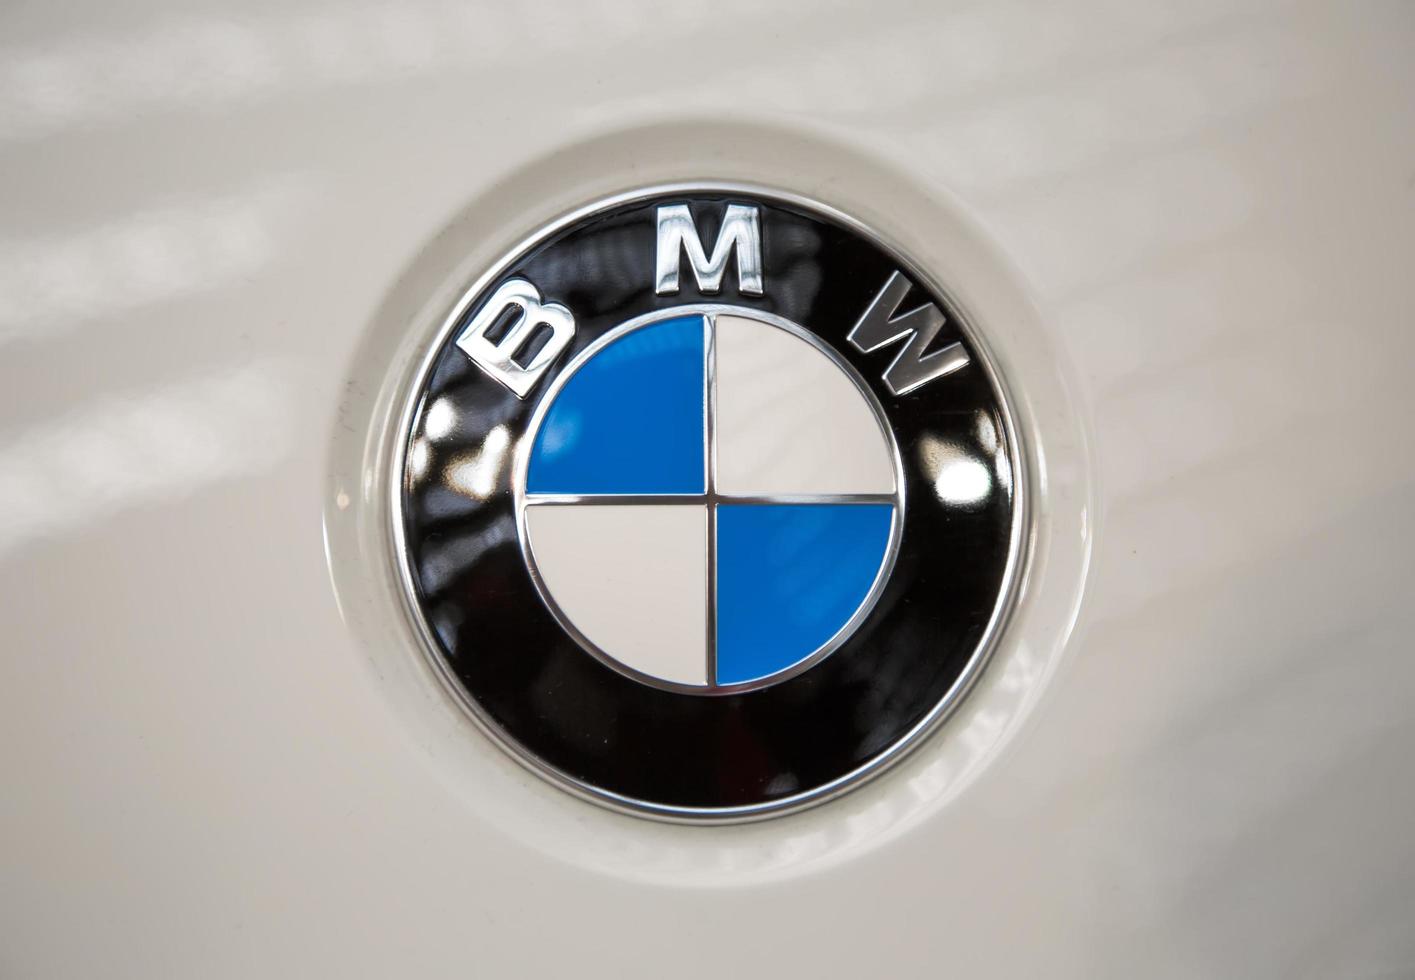 Belgrade, Serbia, 2015 - Detail of the BMW car in Belgrade, Serbia. BMW is a German automobile, motorcycle and engine manufacturing company founded in 1916. photo